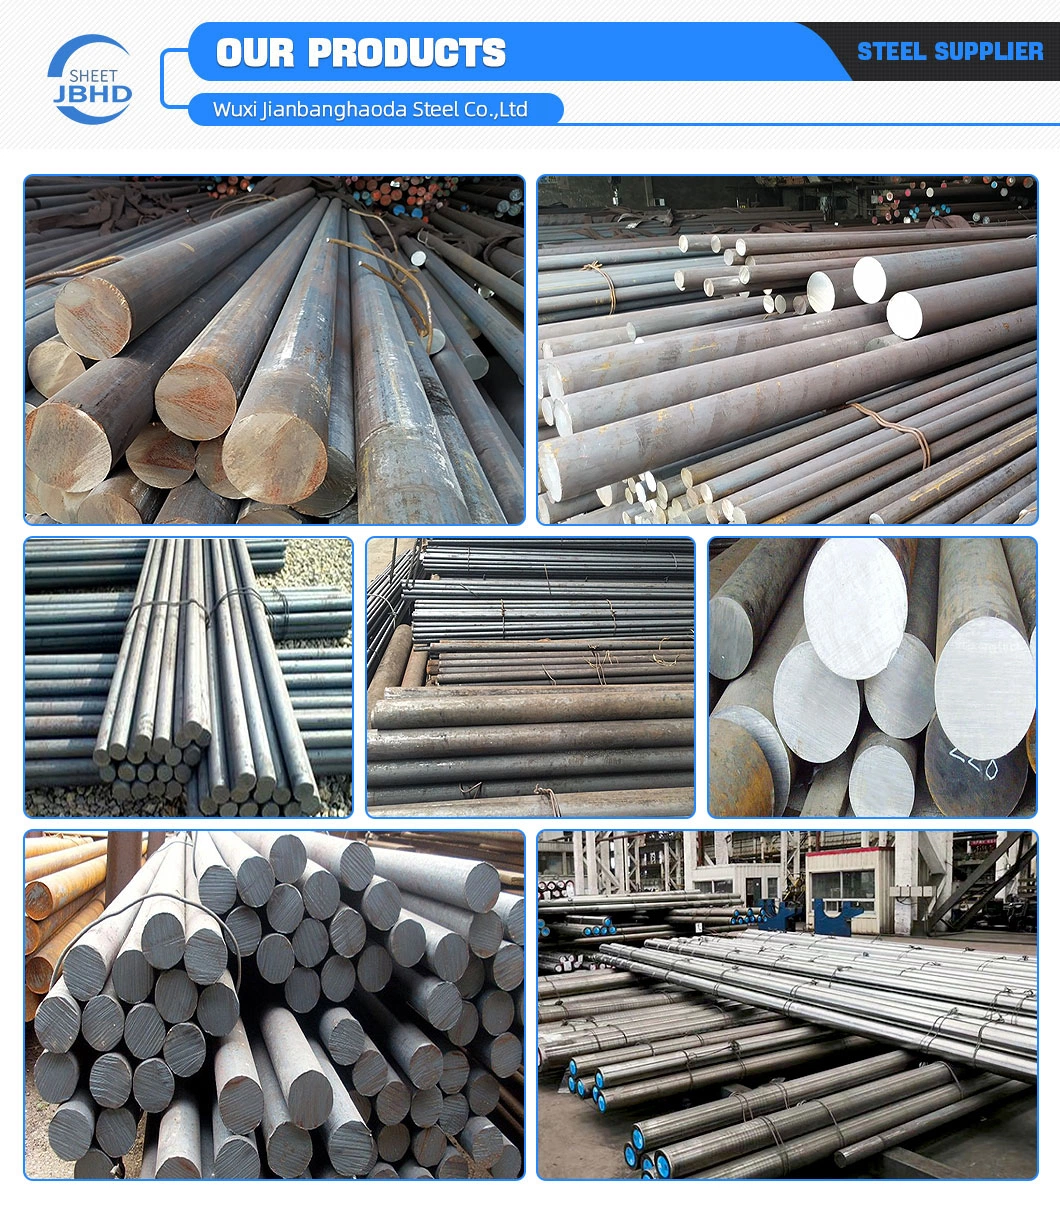 16mnr, SA622mgr. a, S355j2+N Dia 5-120mm Metal Steel Round Bar Hot Rolled Iron Carbon Steel Round Bars